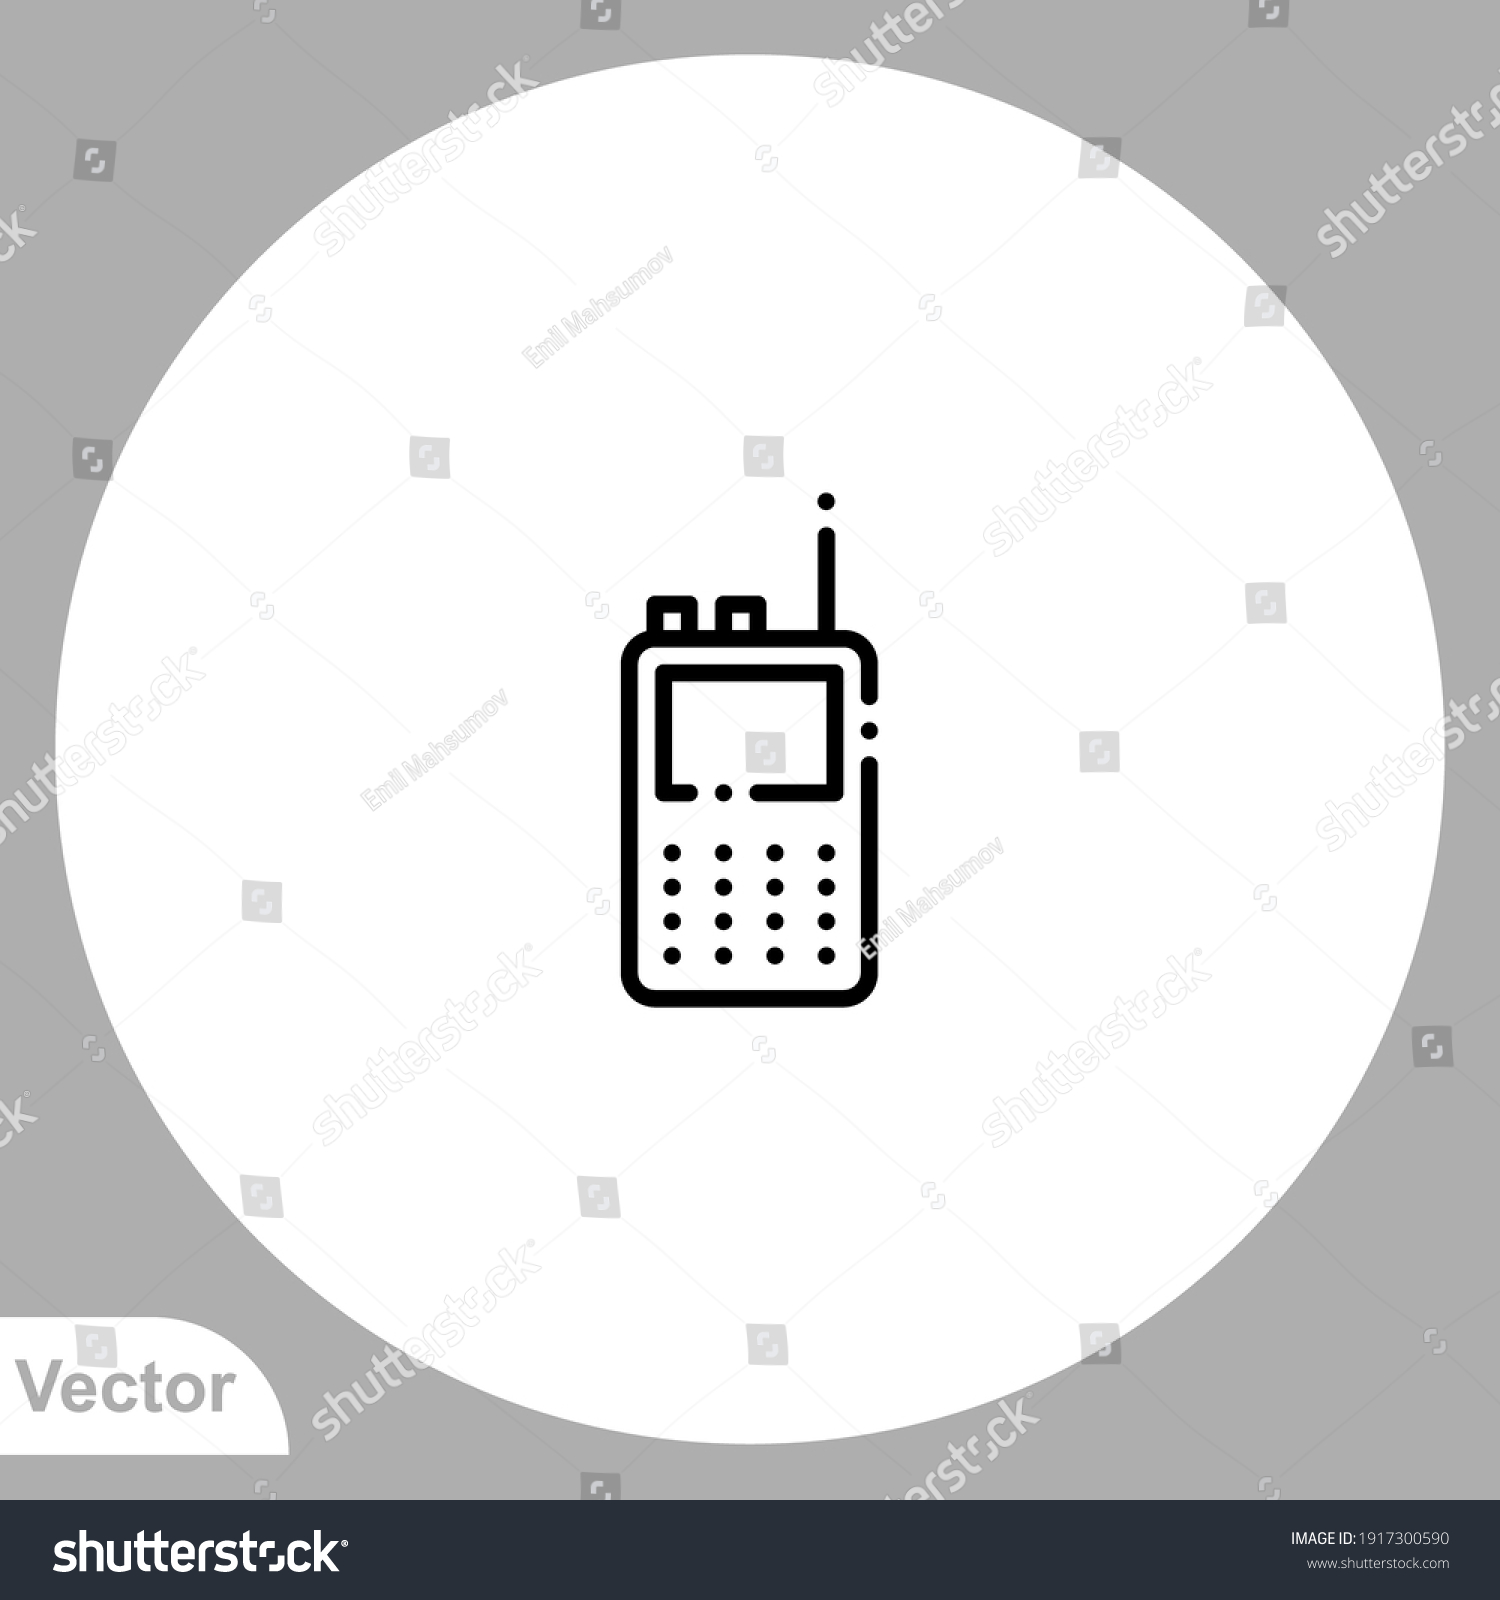 Walkie talkie icon sign vector. Symbol, logo illustration for web and mobile. #1917300590